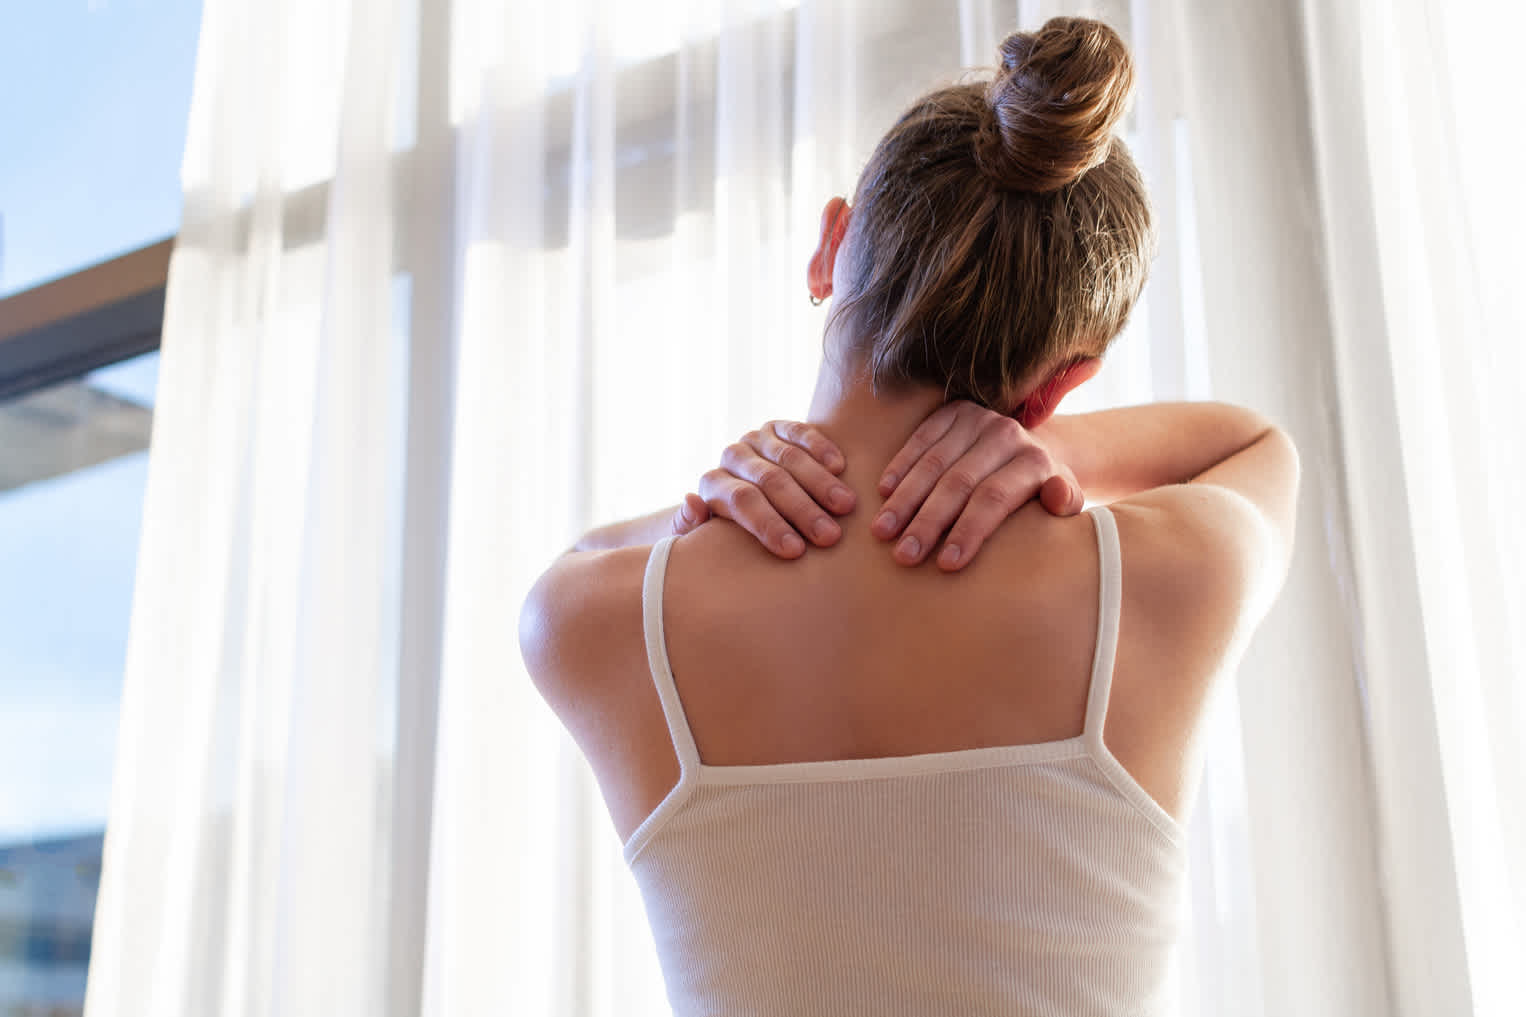 What's Causing Your Upper Back Pain? - University Health News